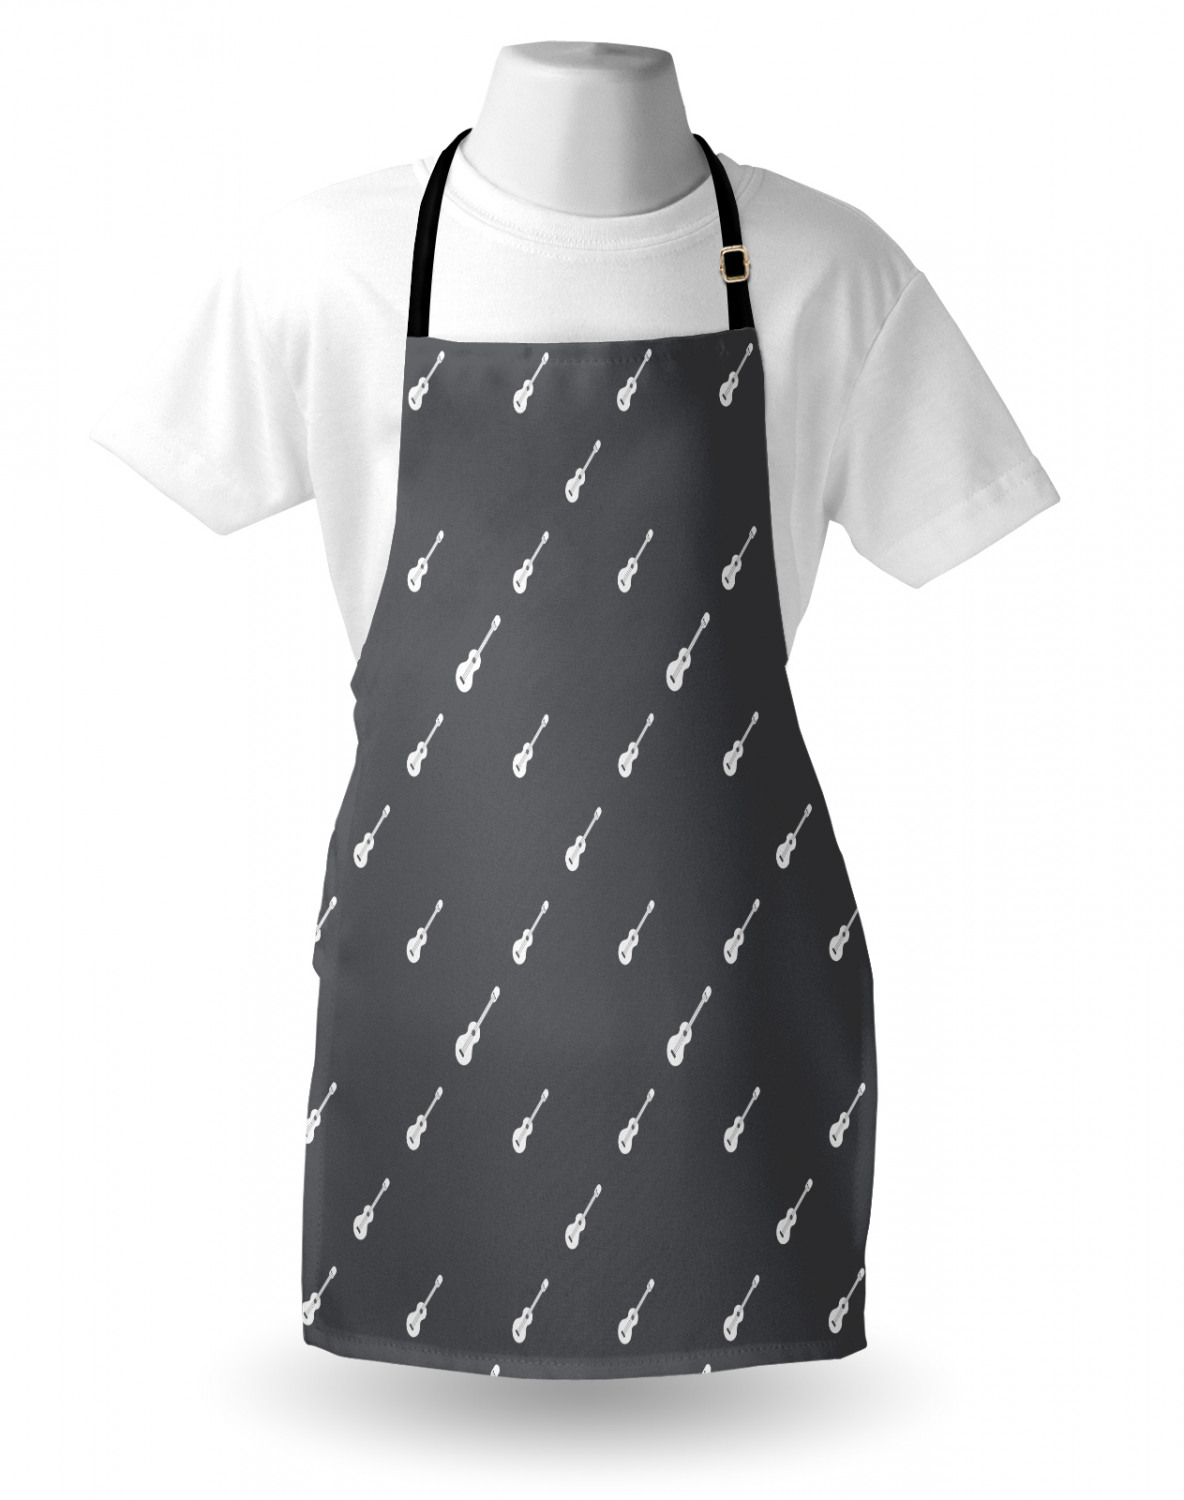 Details about   Ambesonne Apron Adjustable Strap for Gardening Cooking Vivid Colors 